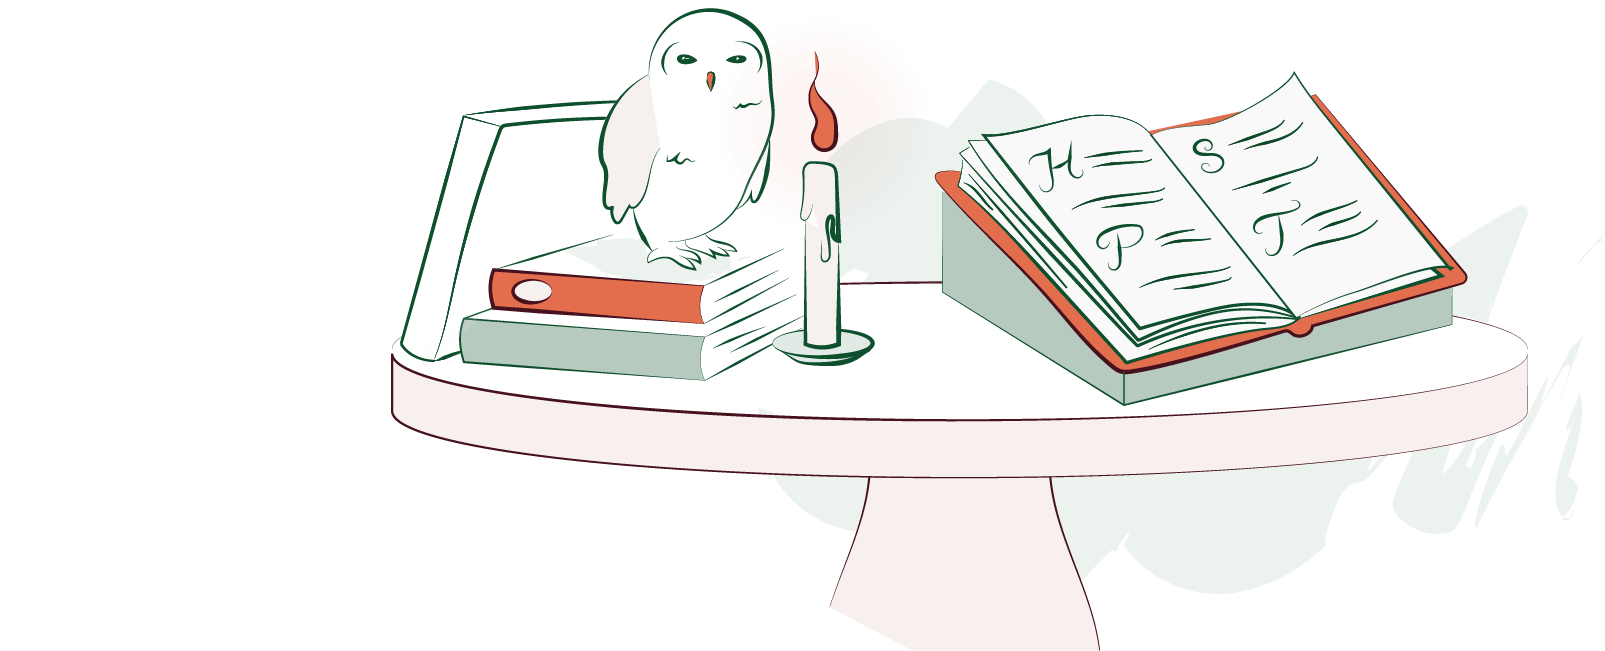 An illustration of a cozy reading spot with a circular table and flickering candle. A snowy owl perches on a stack of books. A book is propped open and the printed type spells out, "HPST"